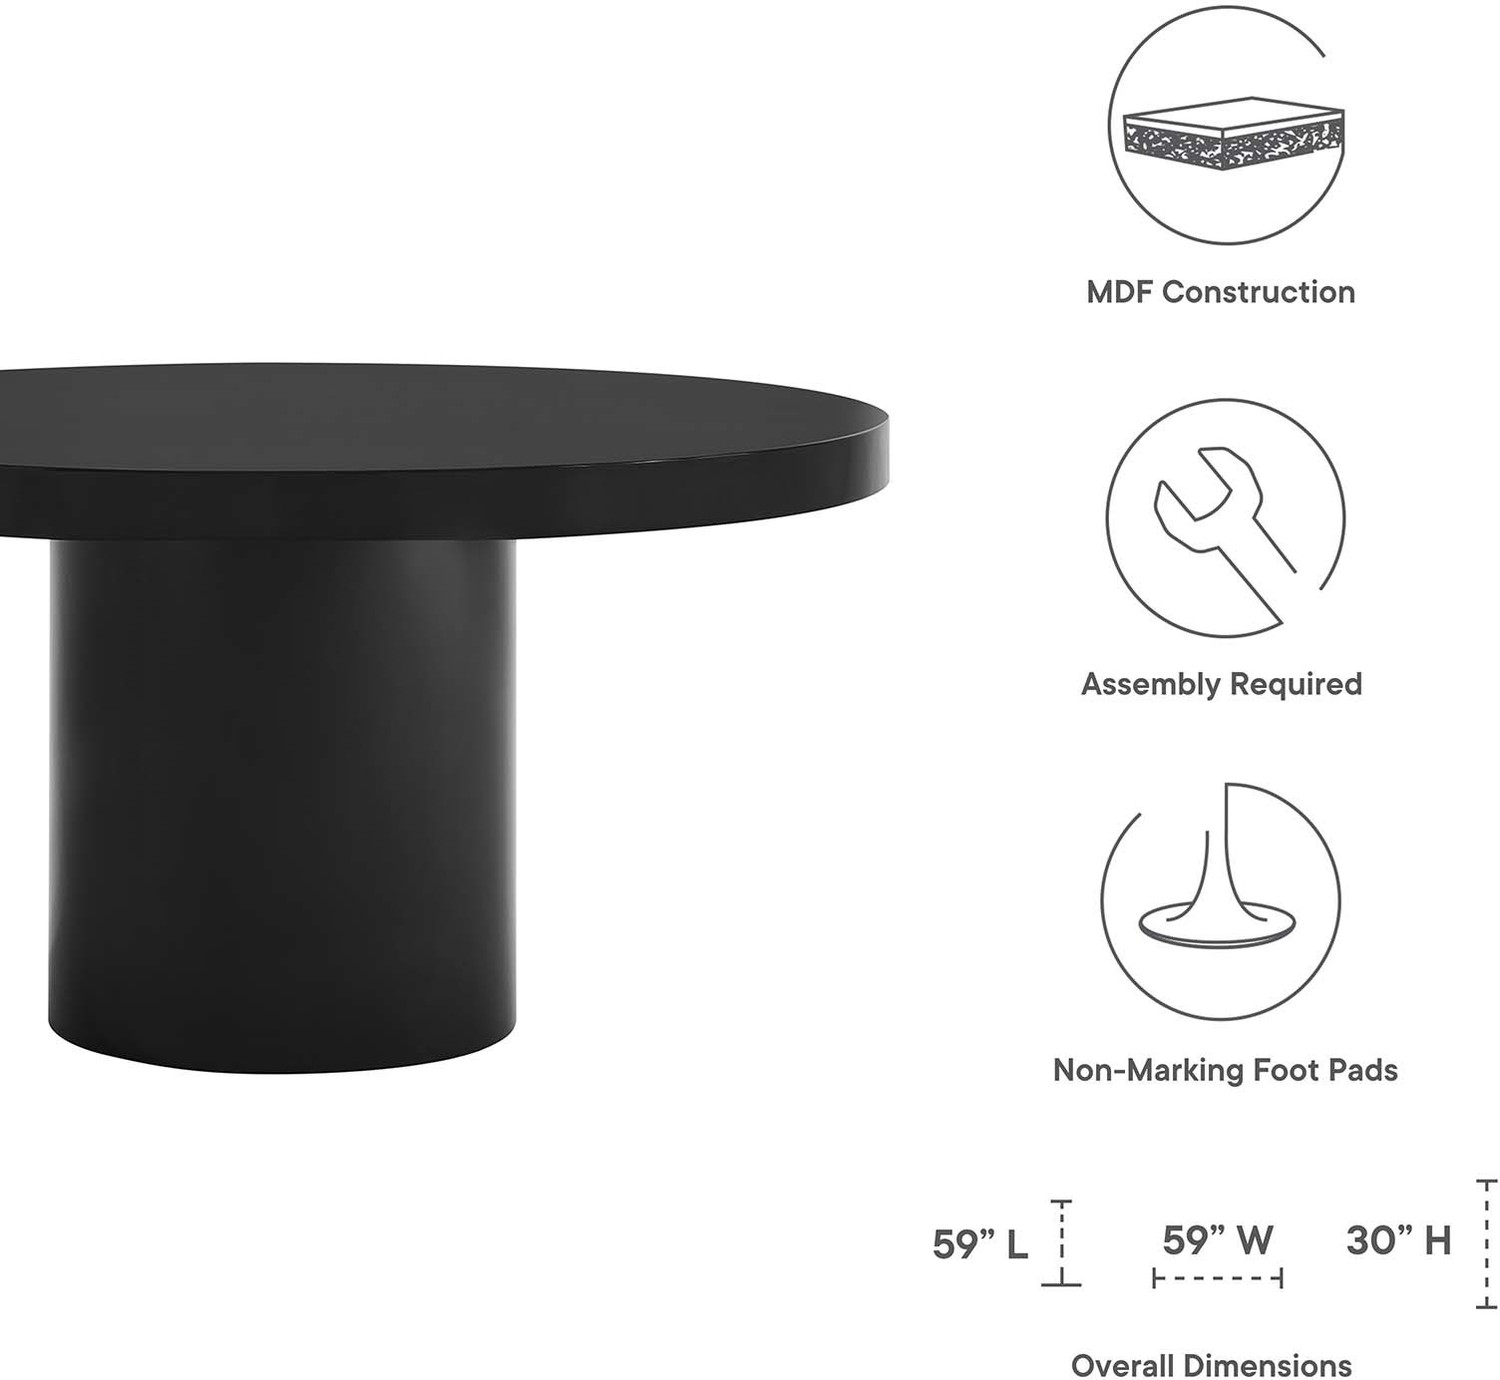 buy round dining table Modway Furniture Bar and Dining Tables Black